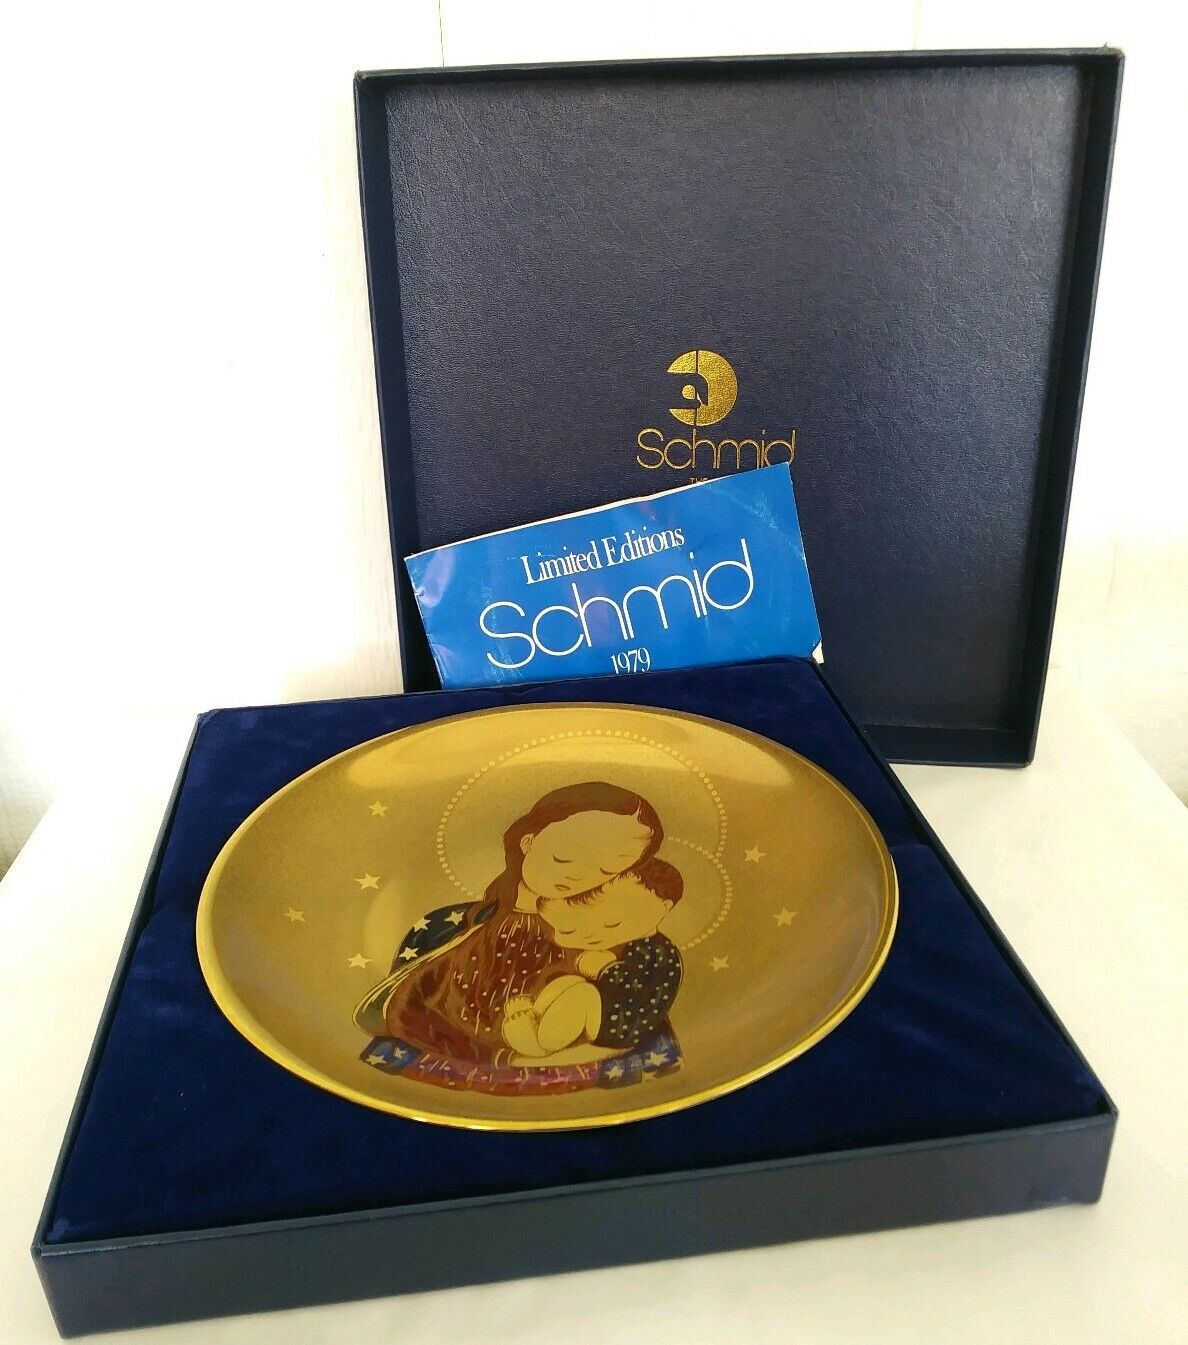 Schmid Tranquility Plate Sister Berta Hummel Numbered Limited Edition w/ Box 